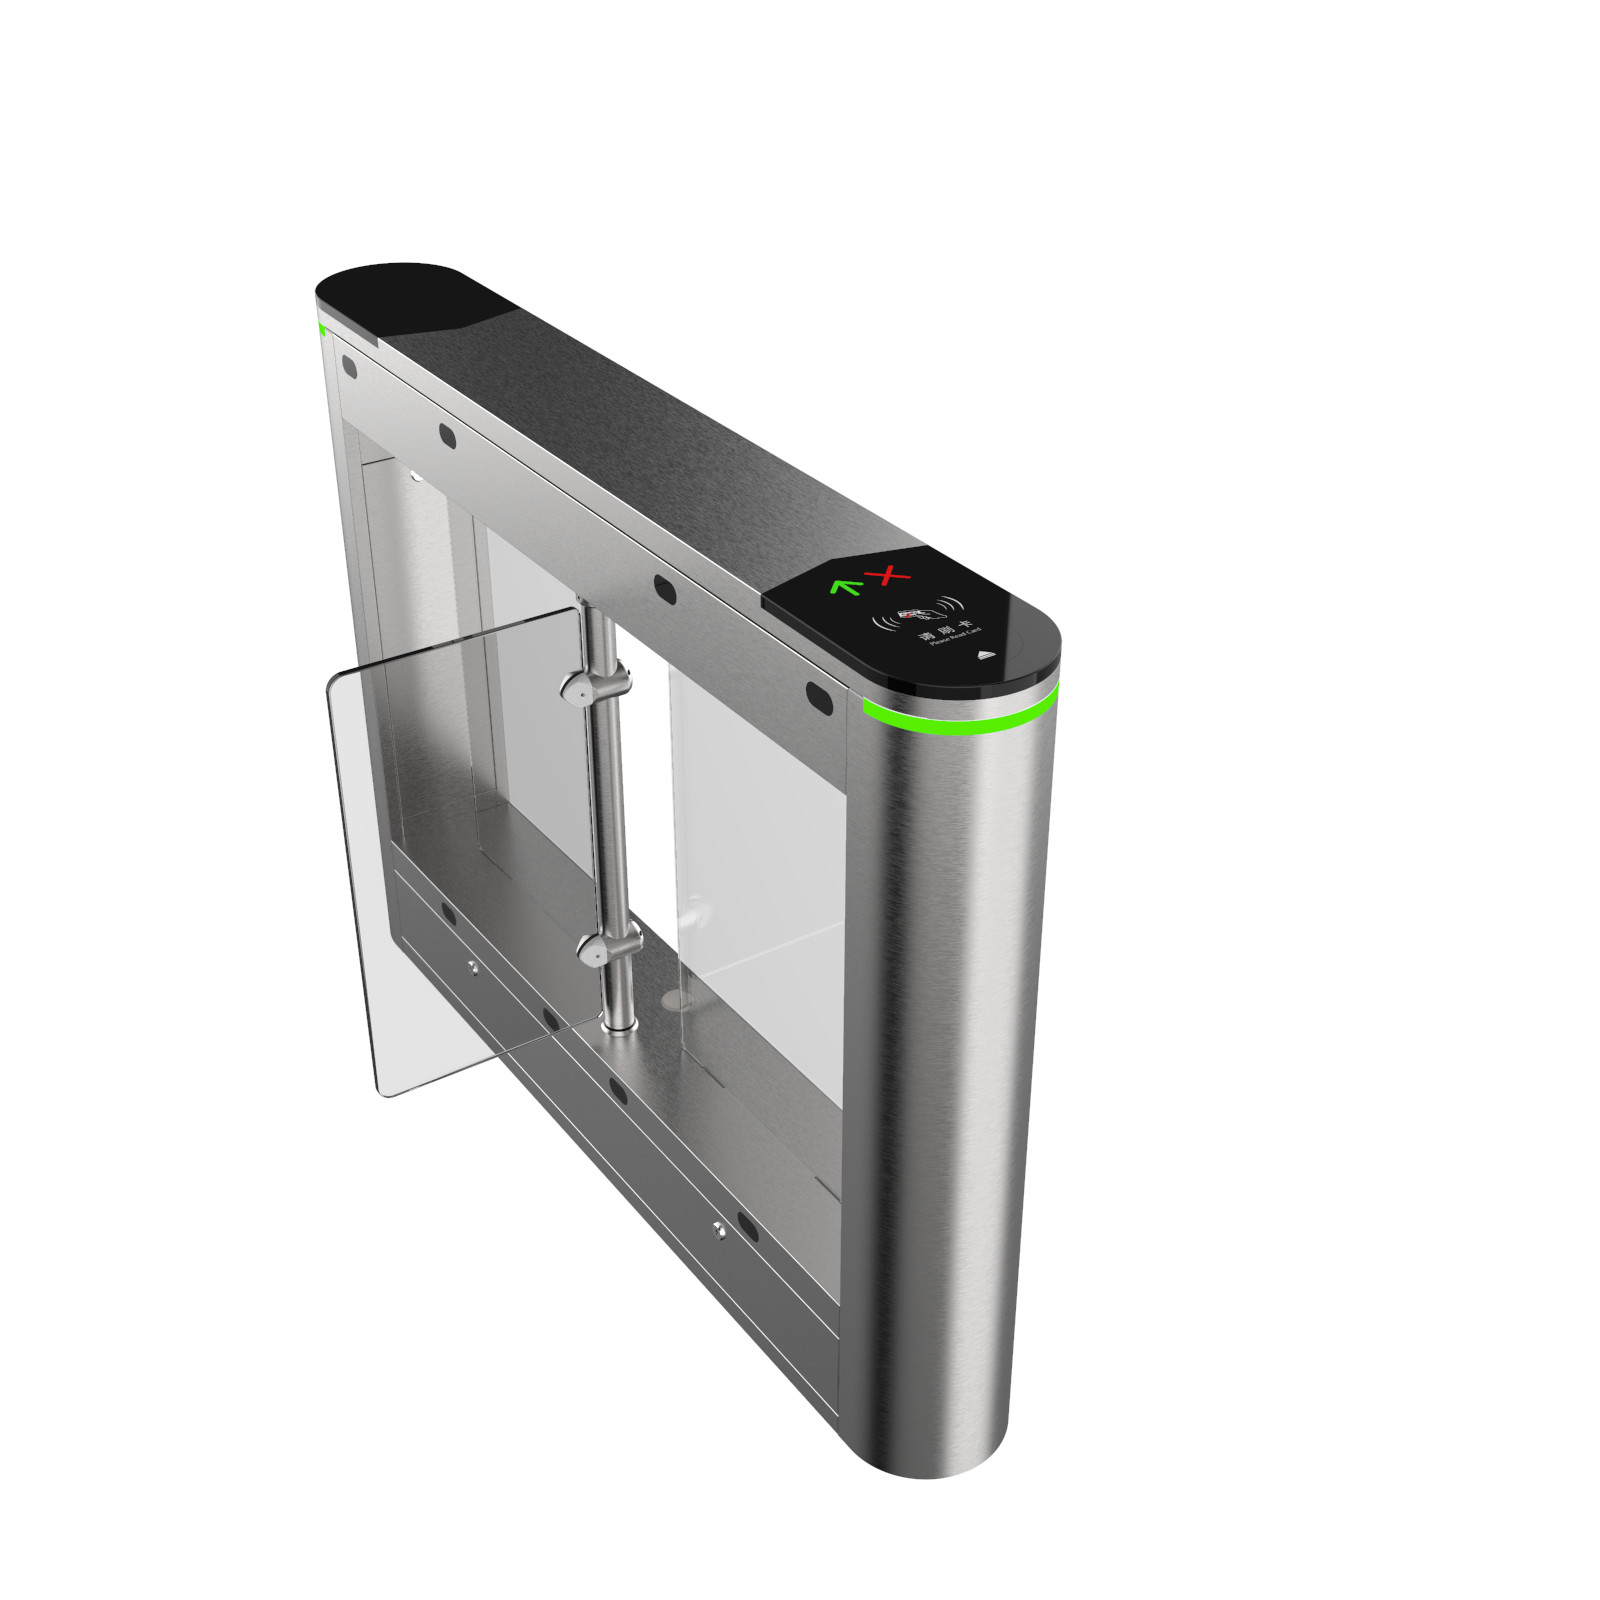 SUS304 School Turnstile Gate Access Control With Tempered Glass Card Cover